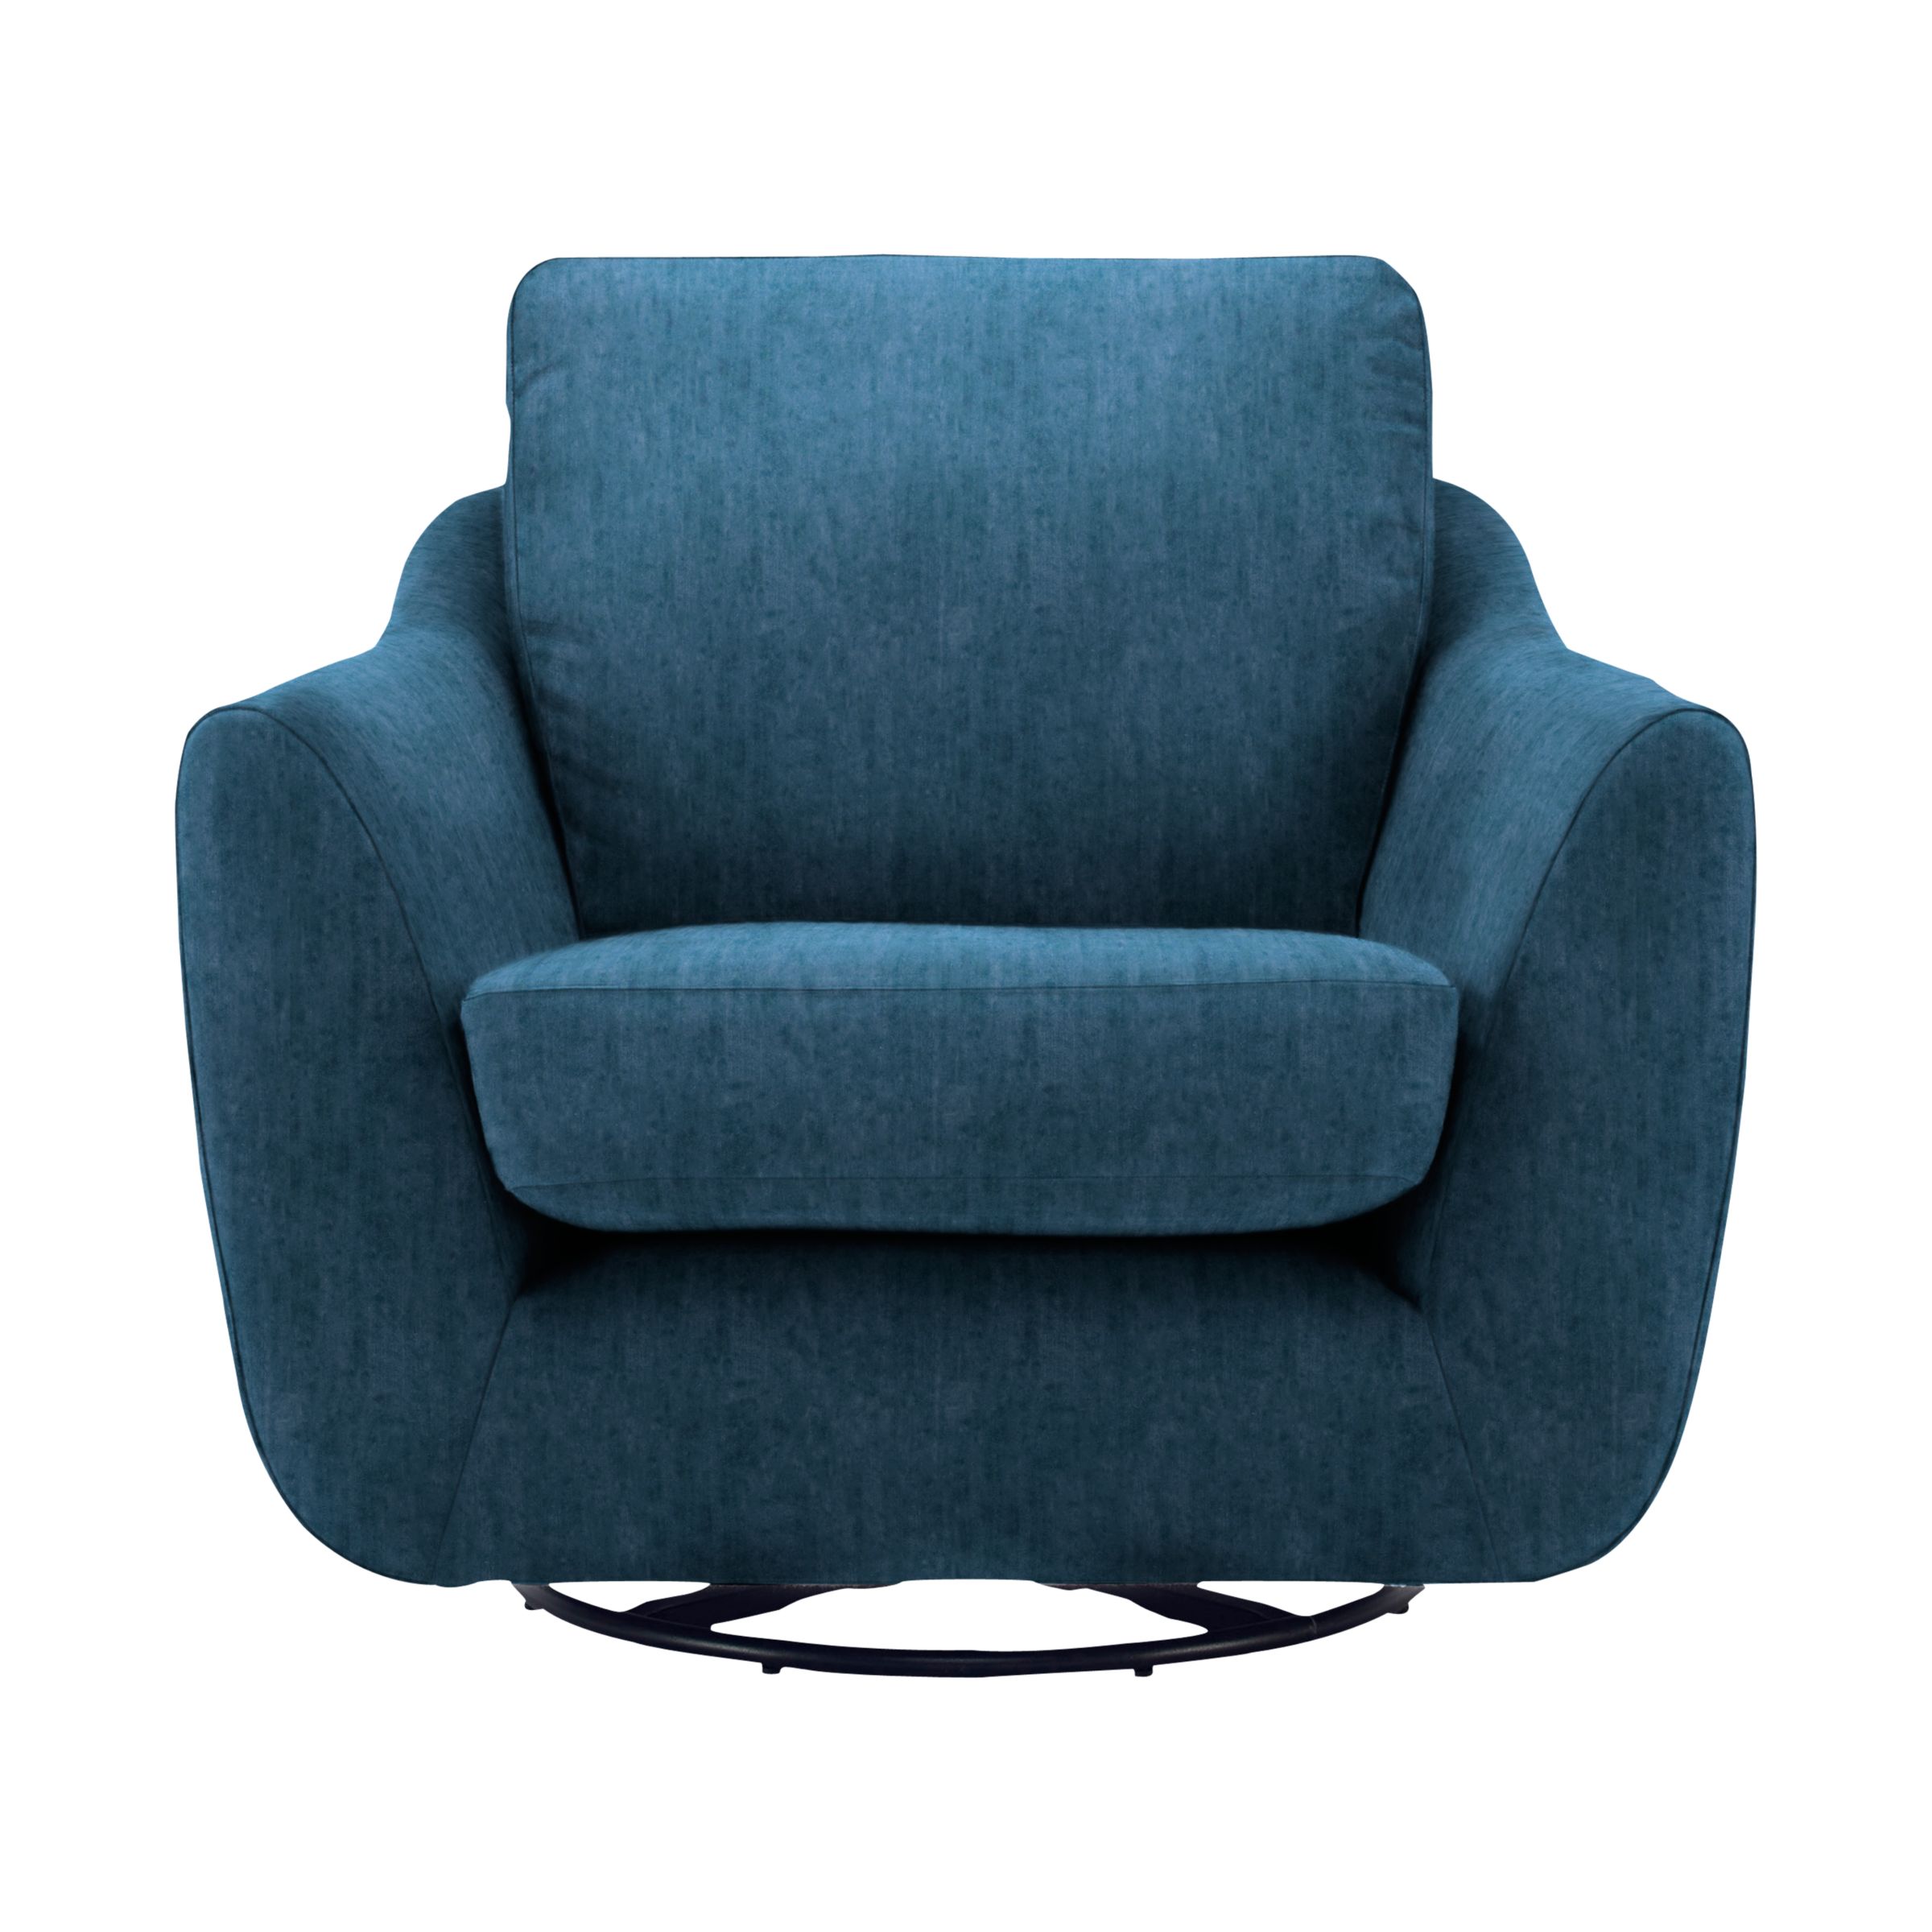 G Plan Vintage The Sixty Seven Swivel Armchair At John Lewis Partners